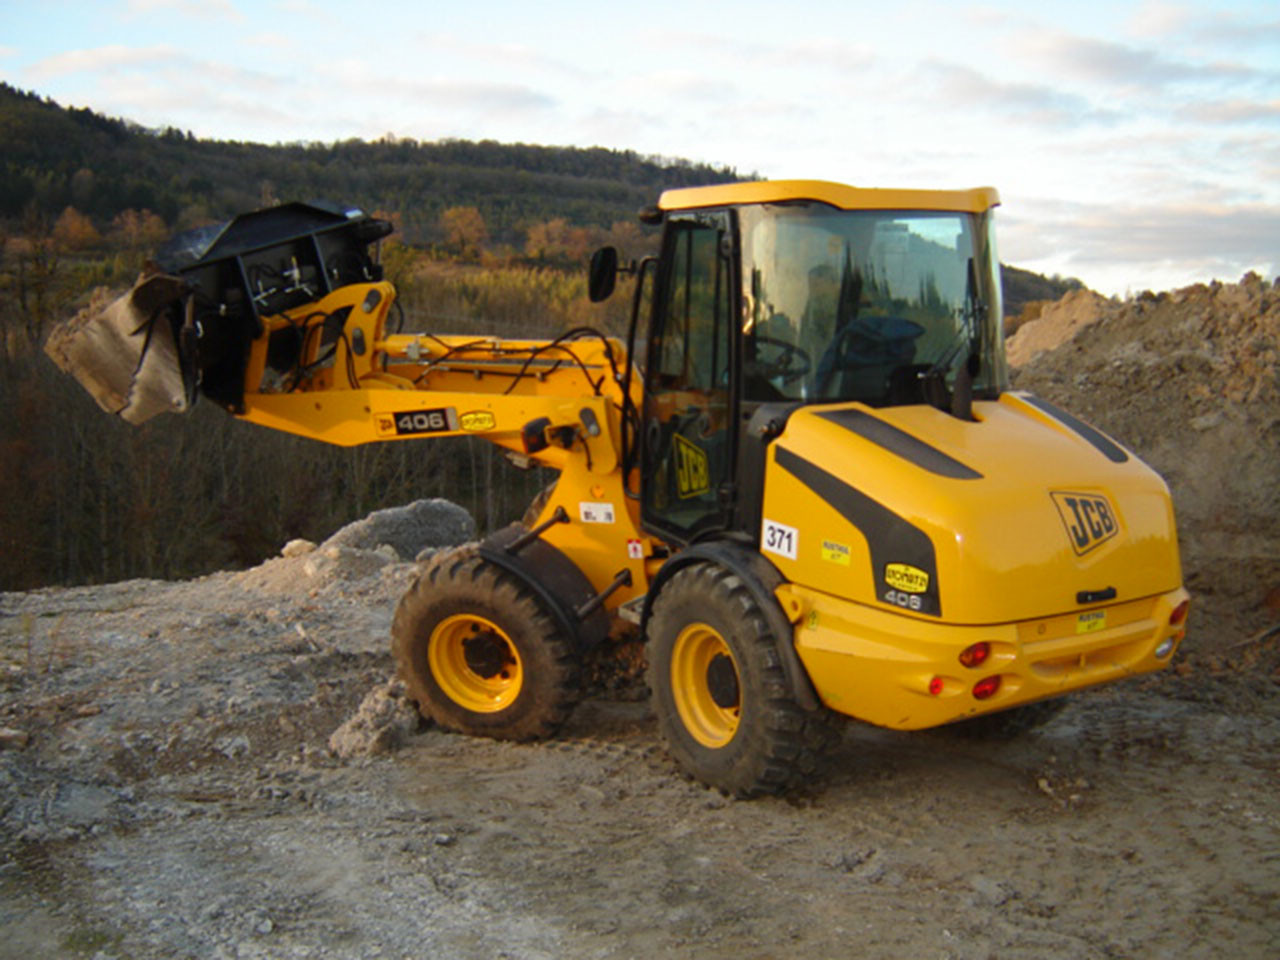 JCB nelle pagine della storia 1680x1050_1558611441_2005---the-406-compact-loader-wih-new-parallel-lift-geometry-was-introduced